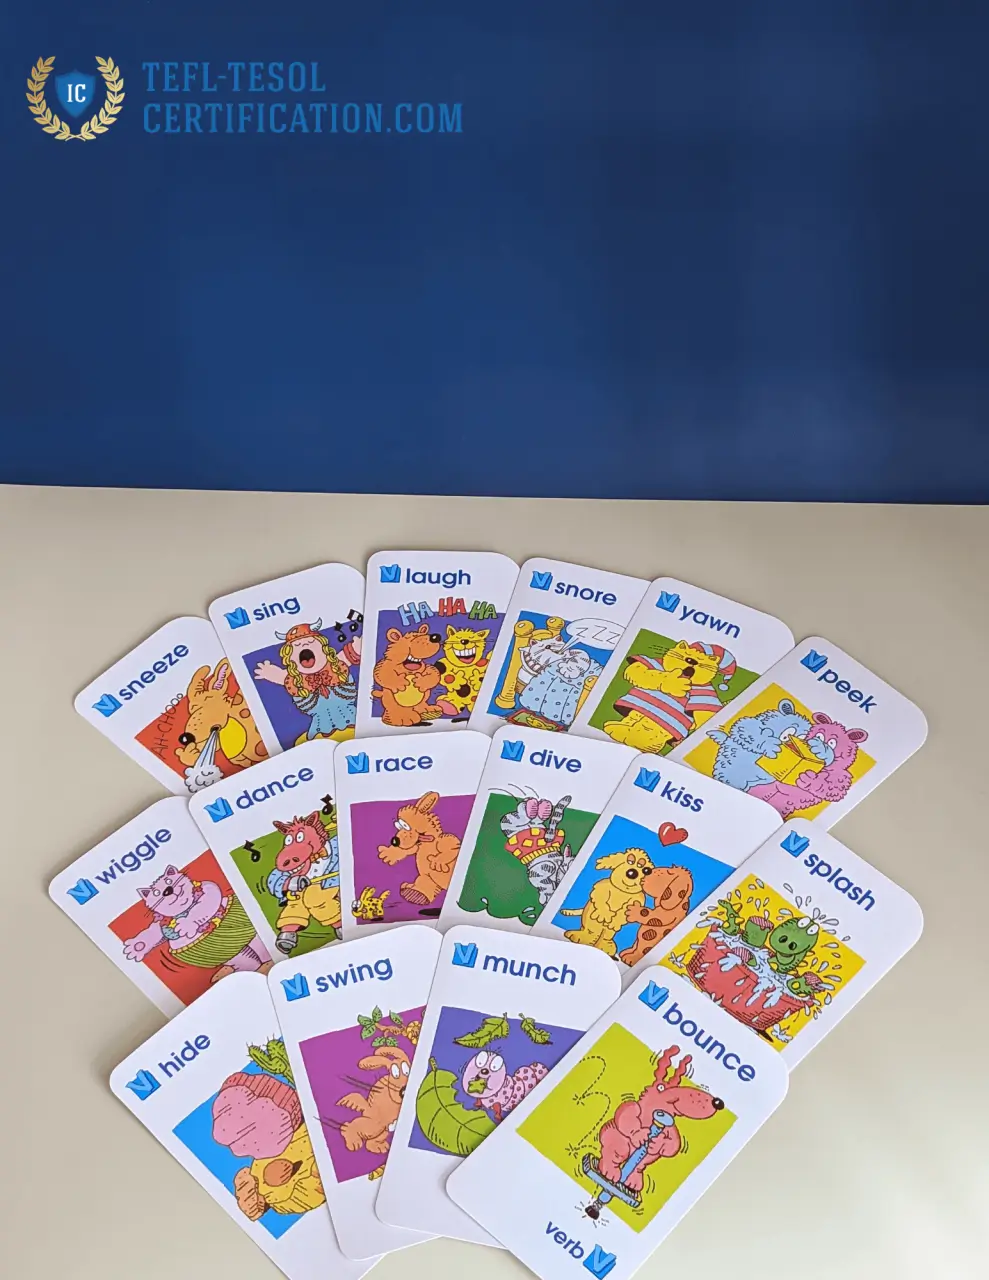 Cards with verbs